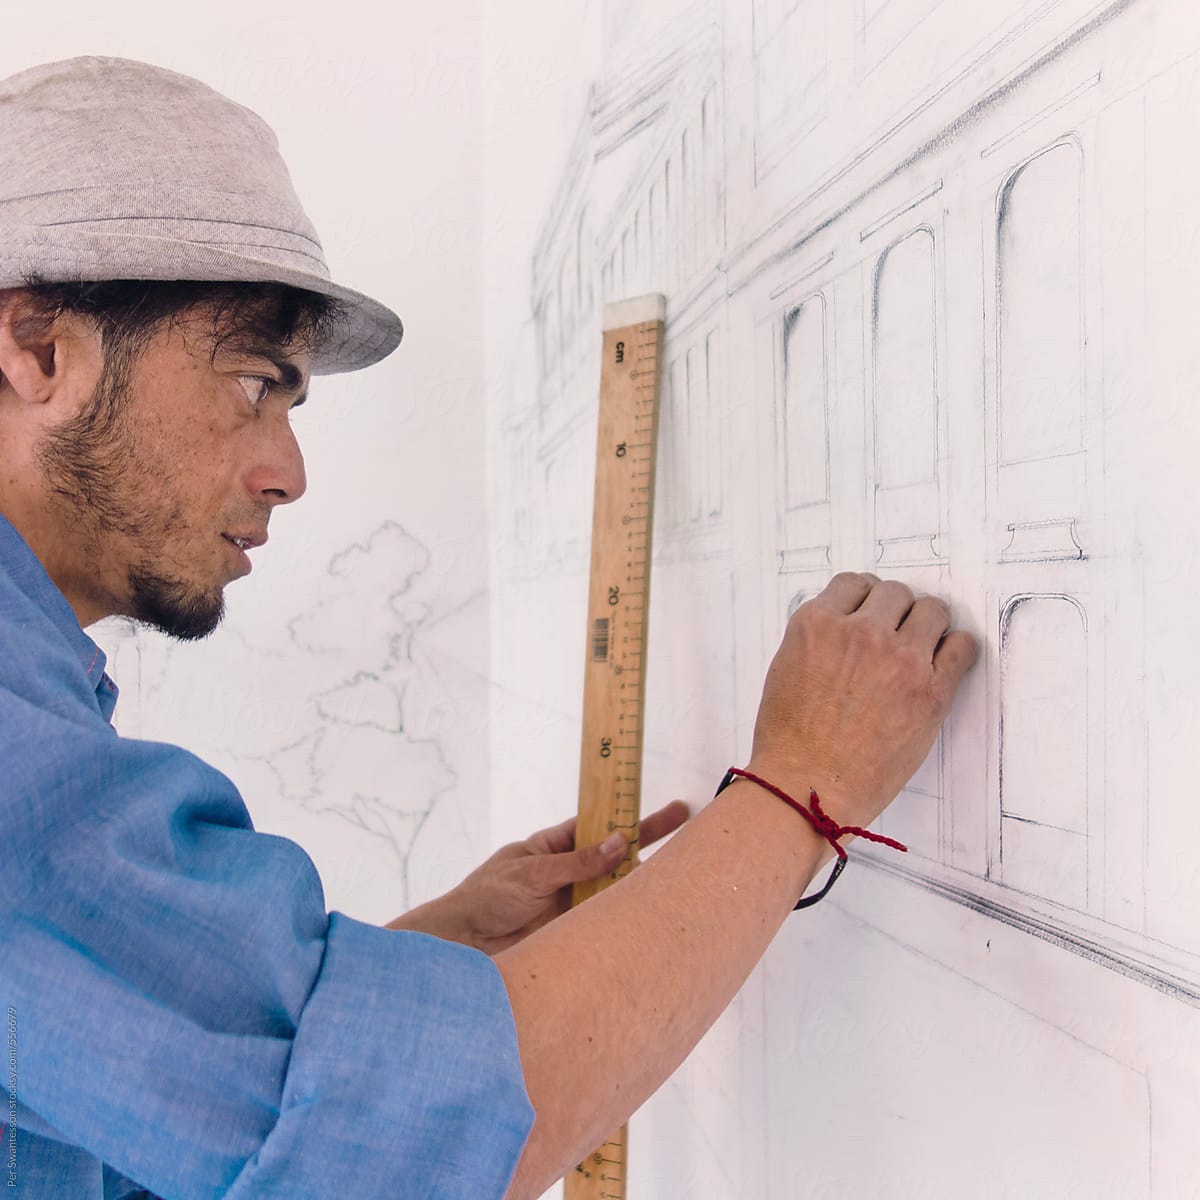 Closeup of concentrated hispanic artist drawing a wall mural